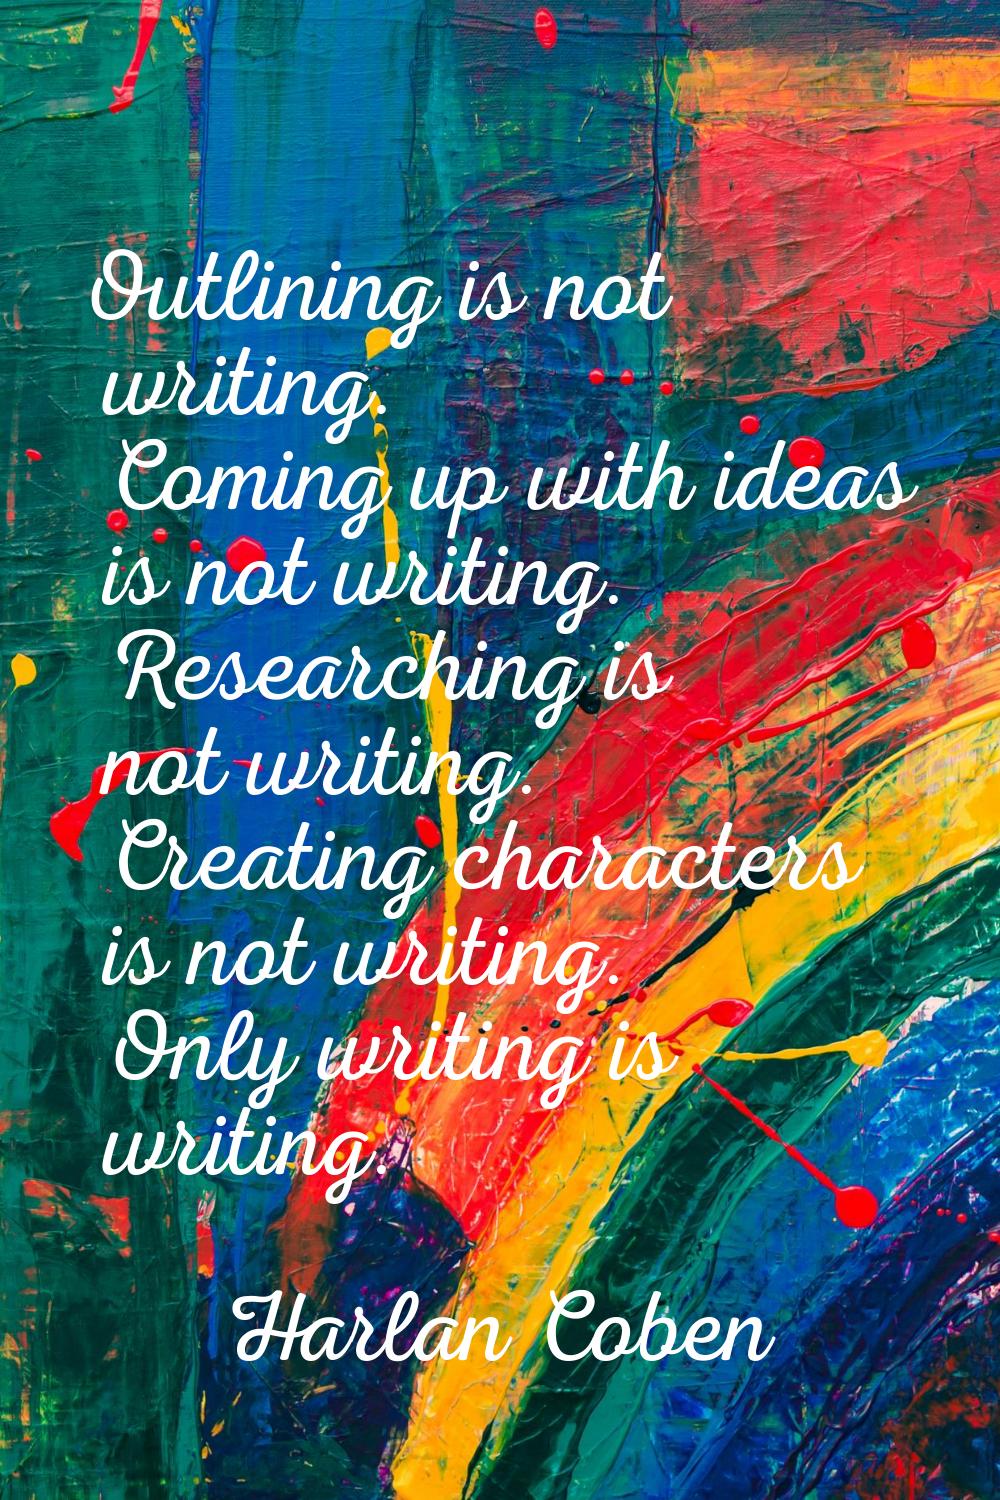 Outlining is not writing. Coming up with ideas is not writing. Researching is not writing. Creating